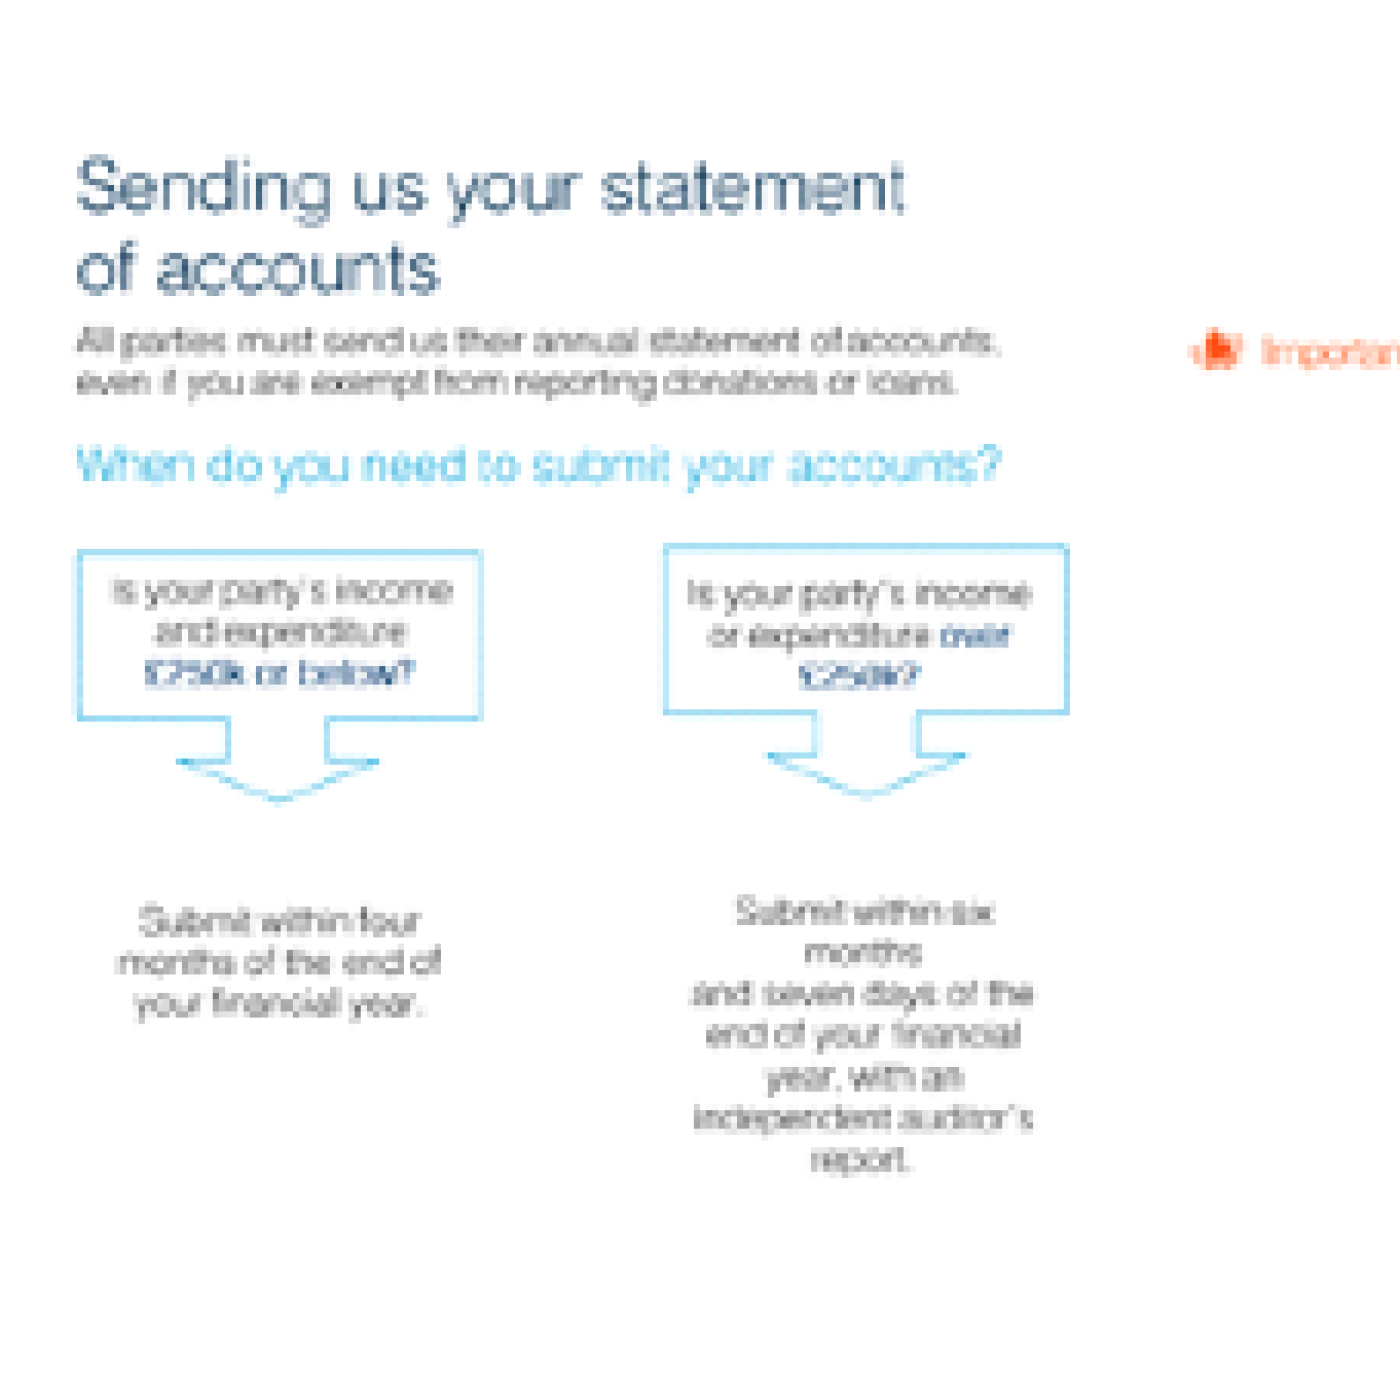 Sending us your statement of accounts